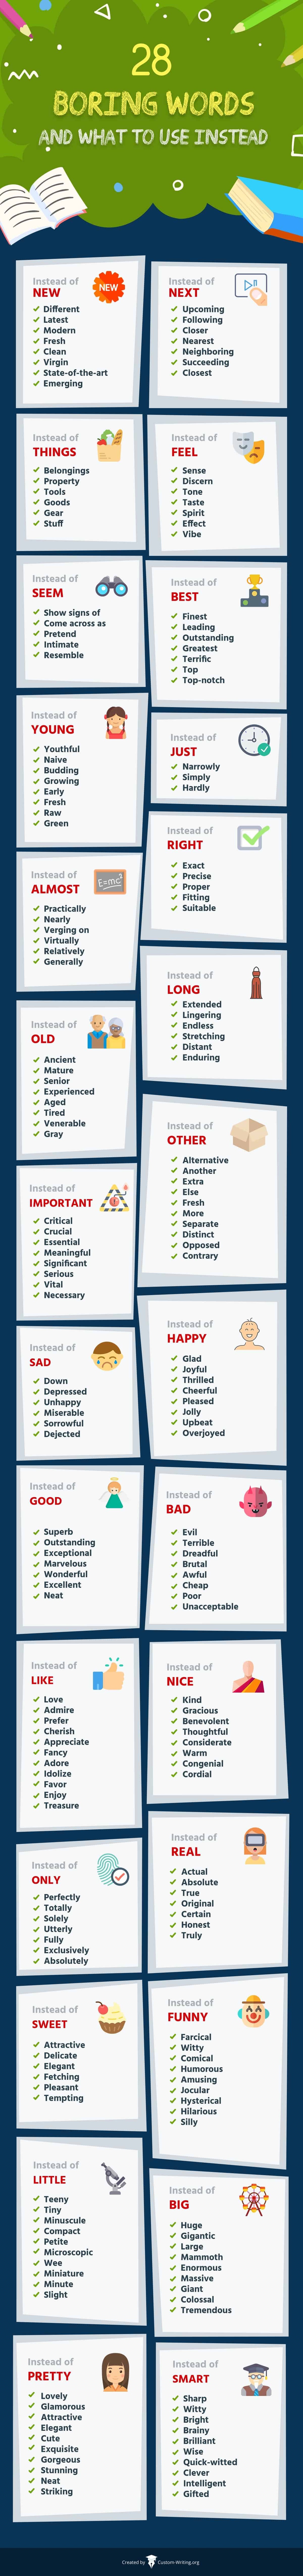 Infographic: boring word substitutions